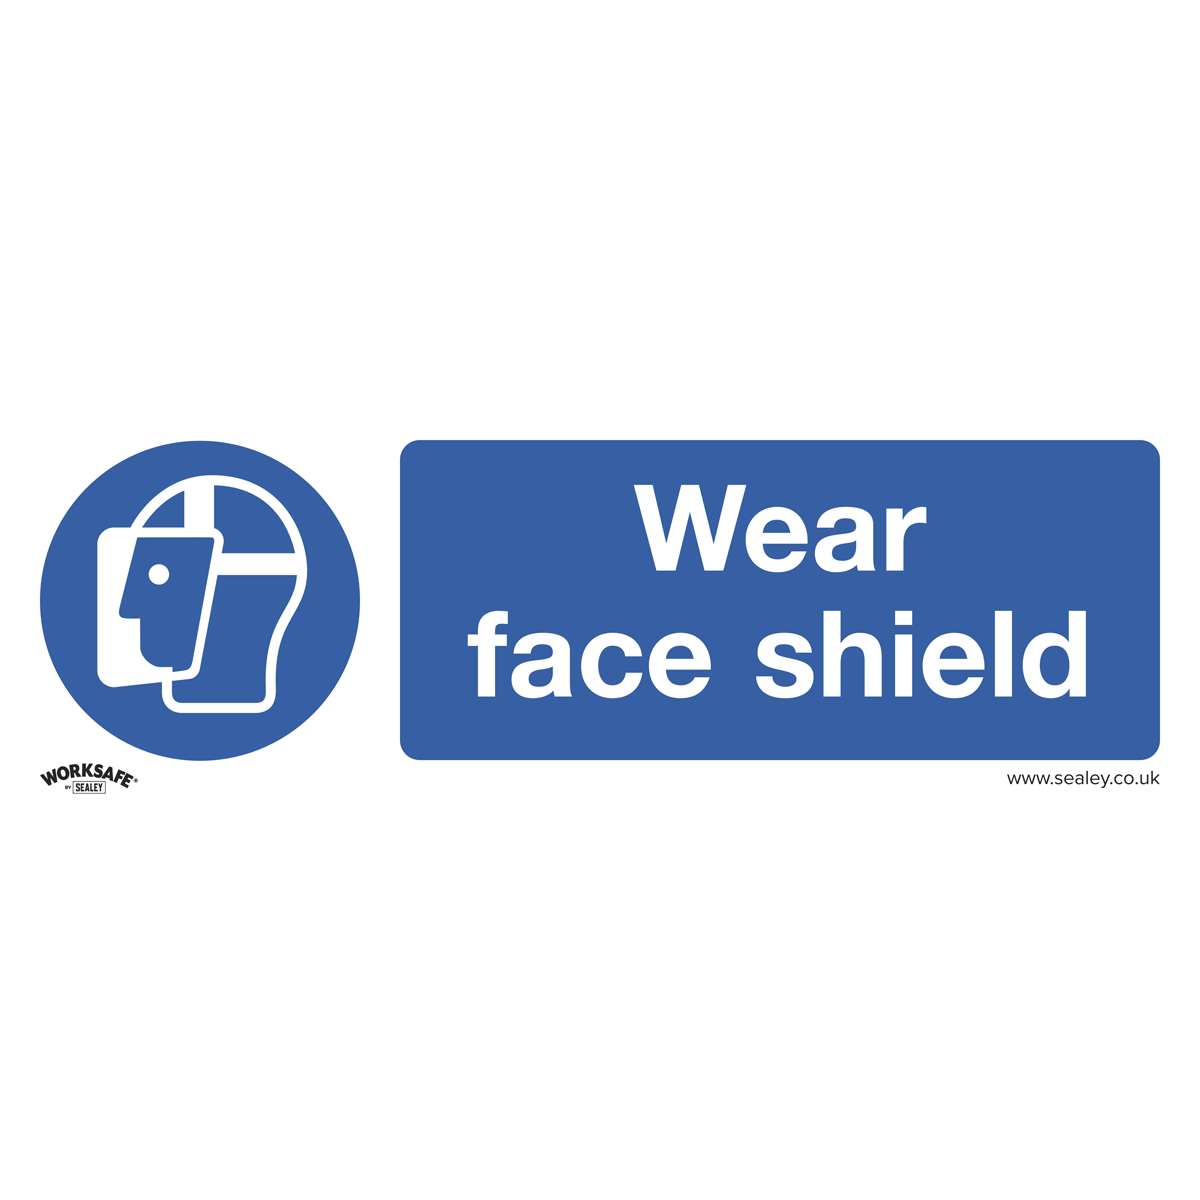 Sealey Mandatory Safety Sign - Wear Face Shield - Self-Adhesive Vinyl - Pack of 10